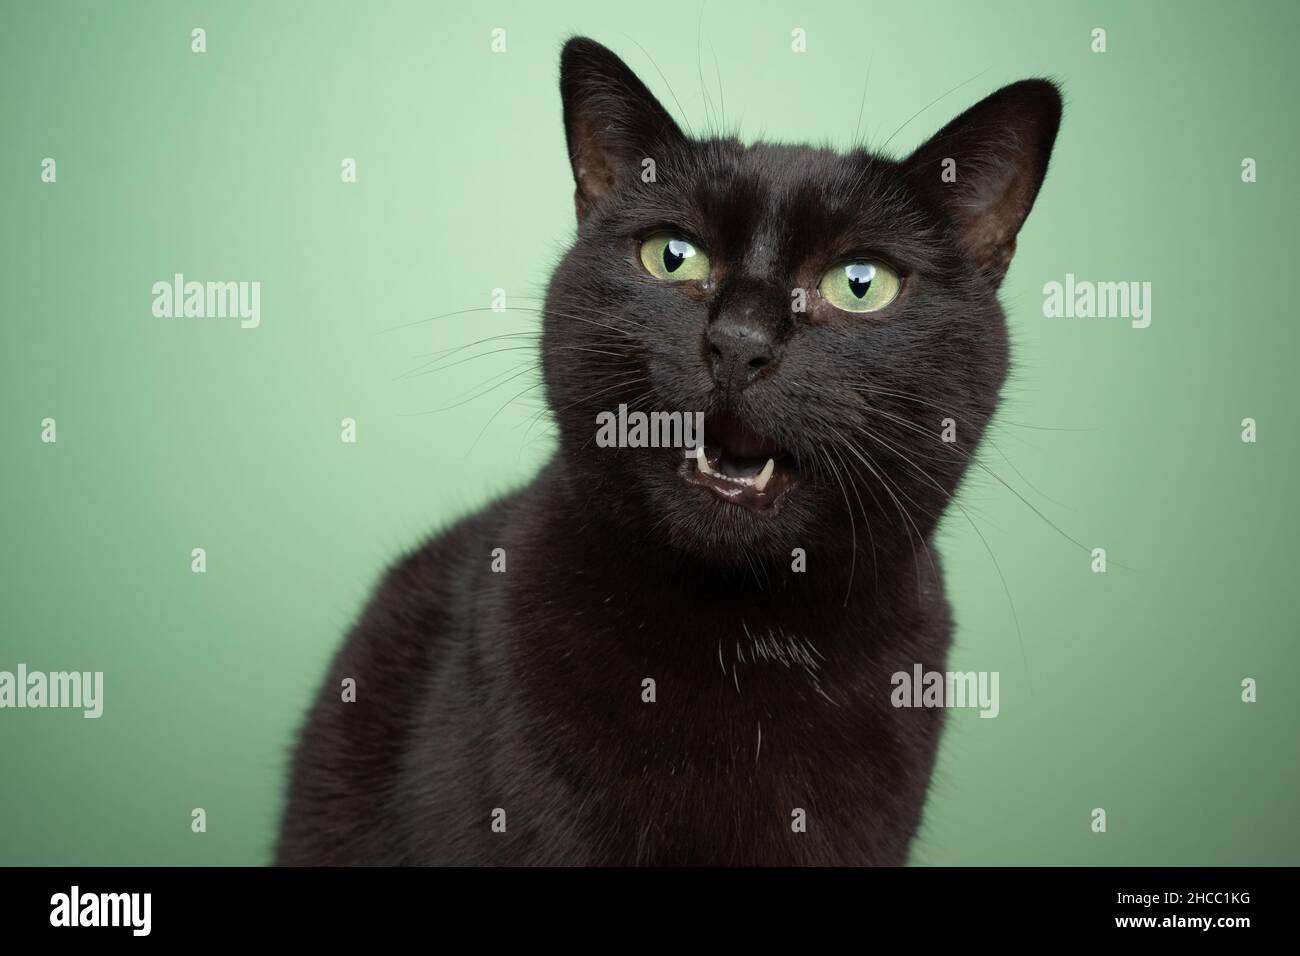 black domestic cat with green eyes meowing portrait on green background Stock Photo